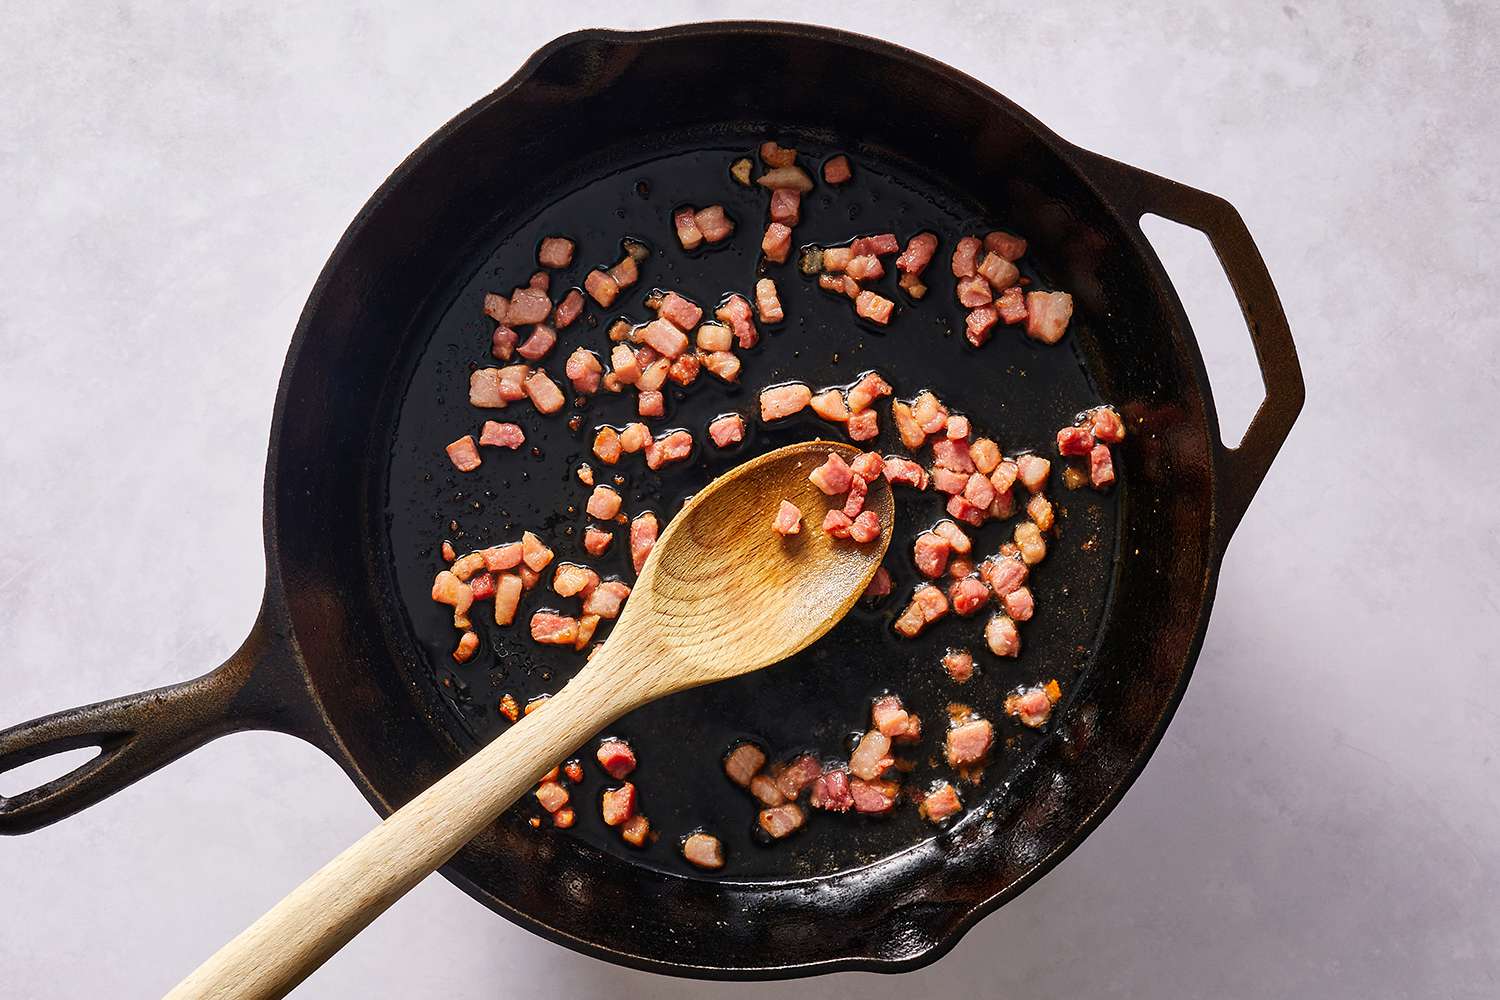 Pancetta cooking in a cast iron pan